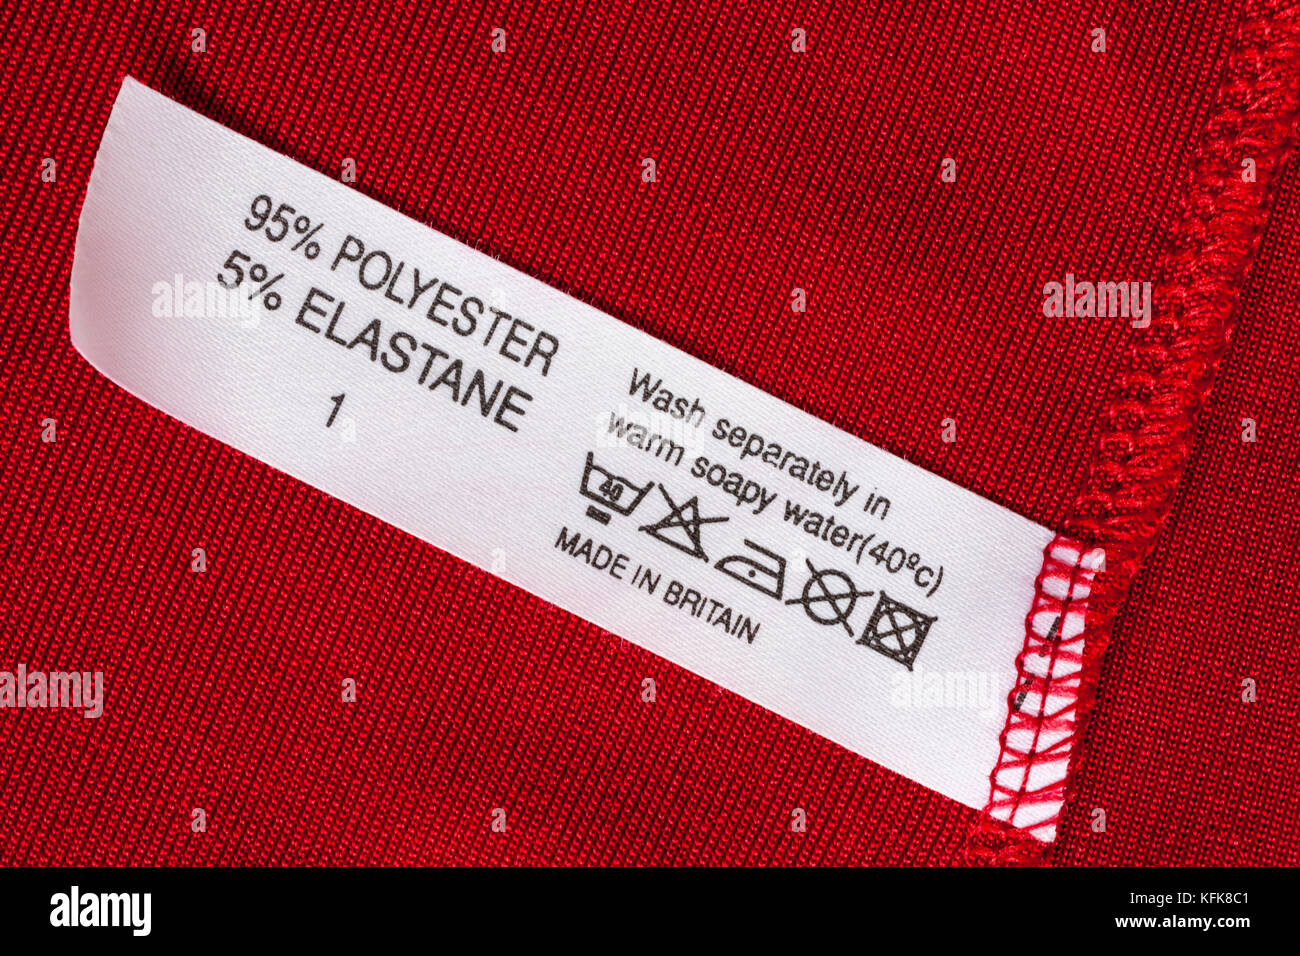 95% polyester 5% elastane label in woman's red top made in Britain with wash care instructions and symbols Stock Photo